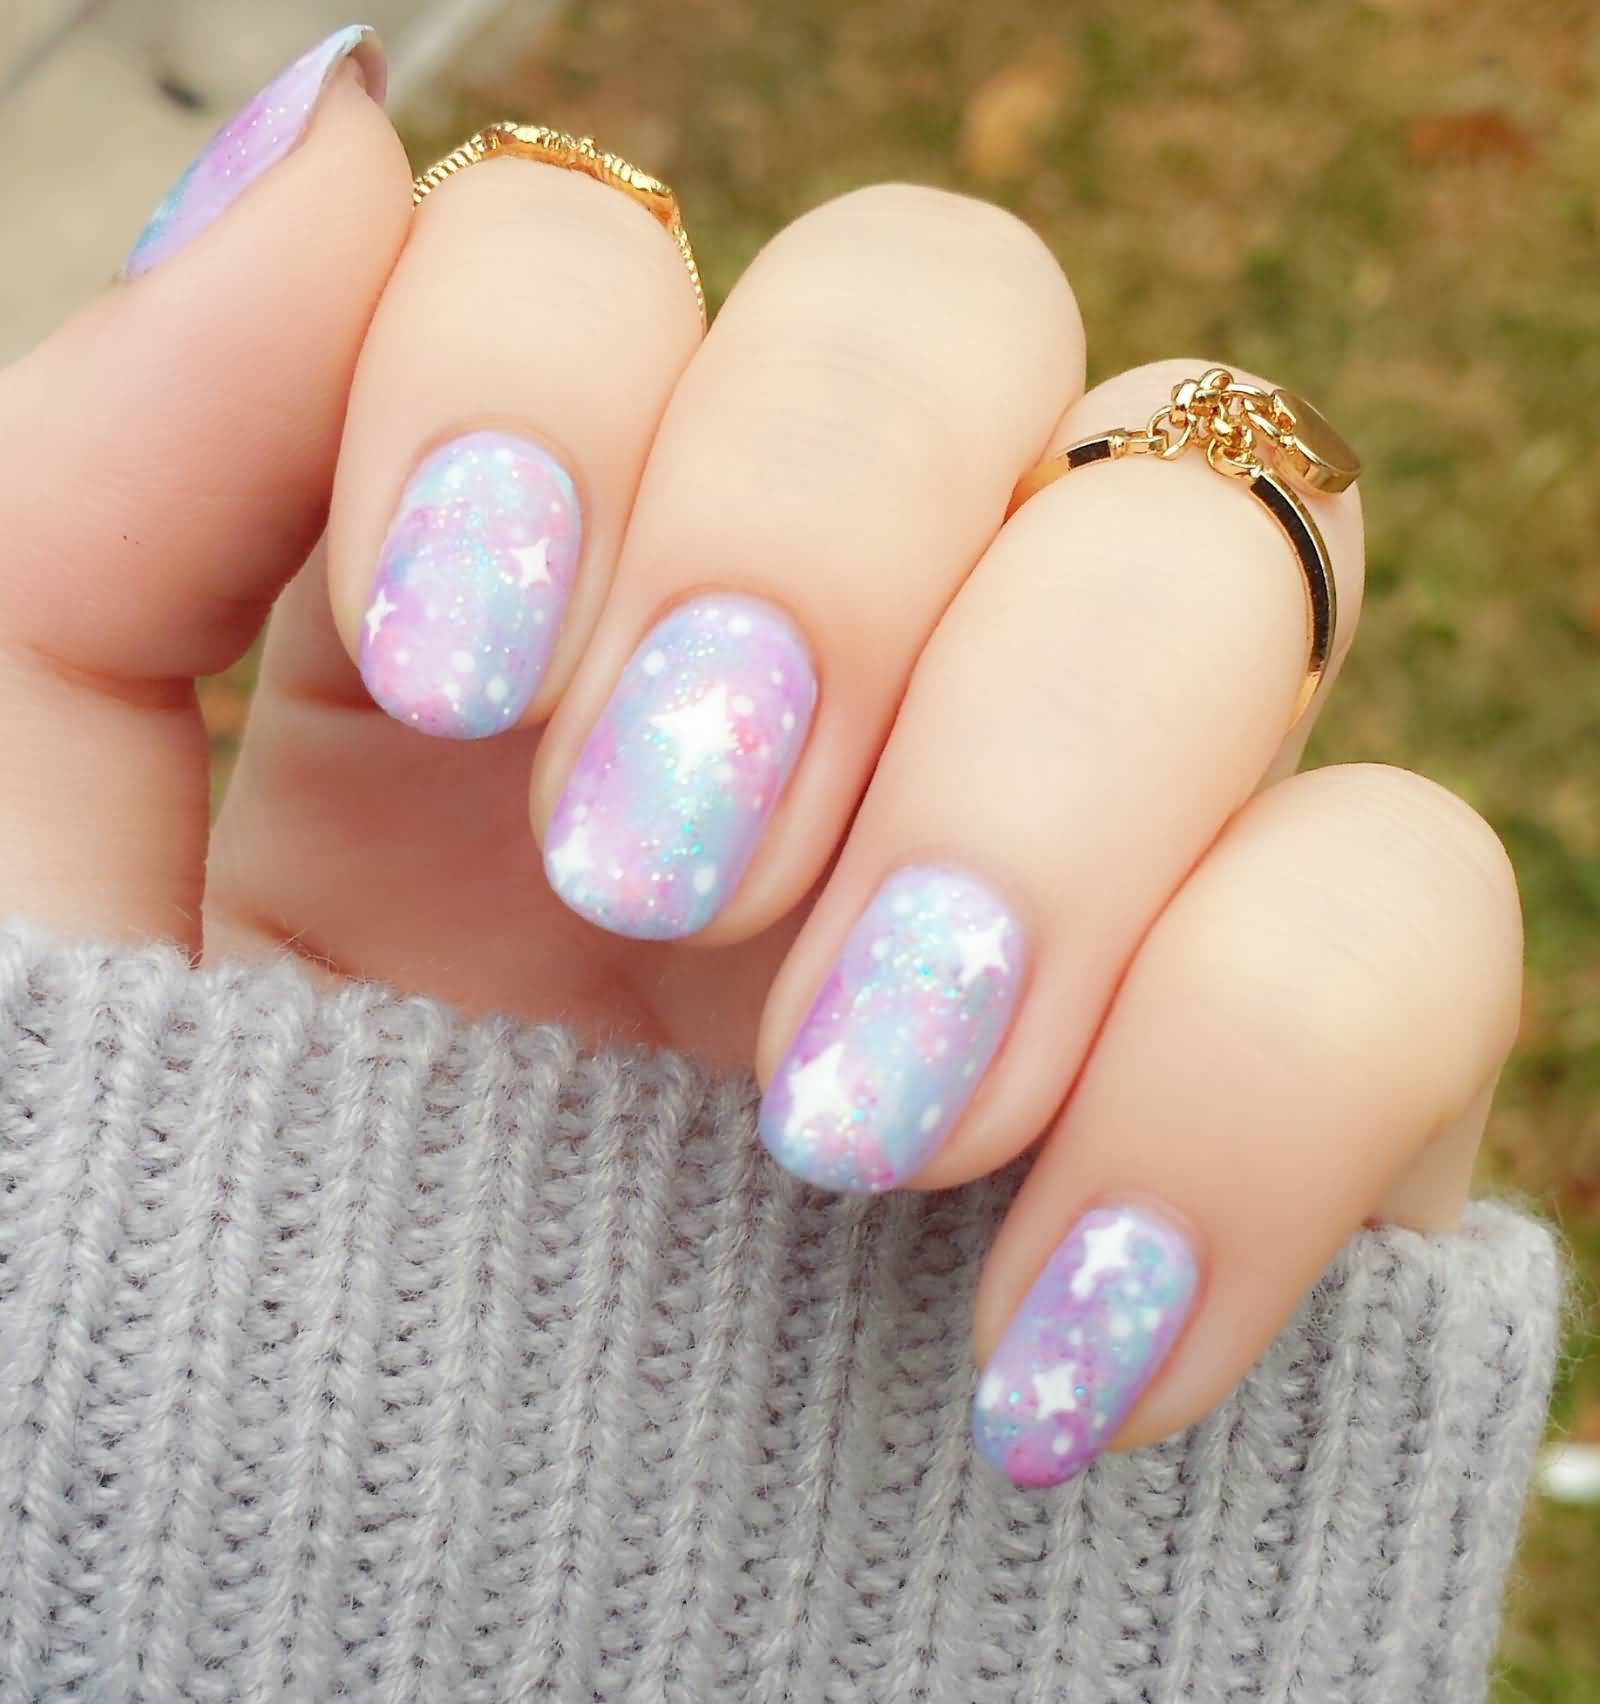 Pastel Nail Art With White Stars Designs